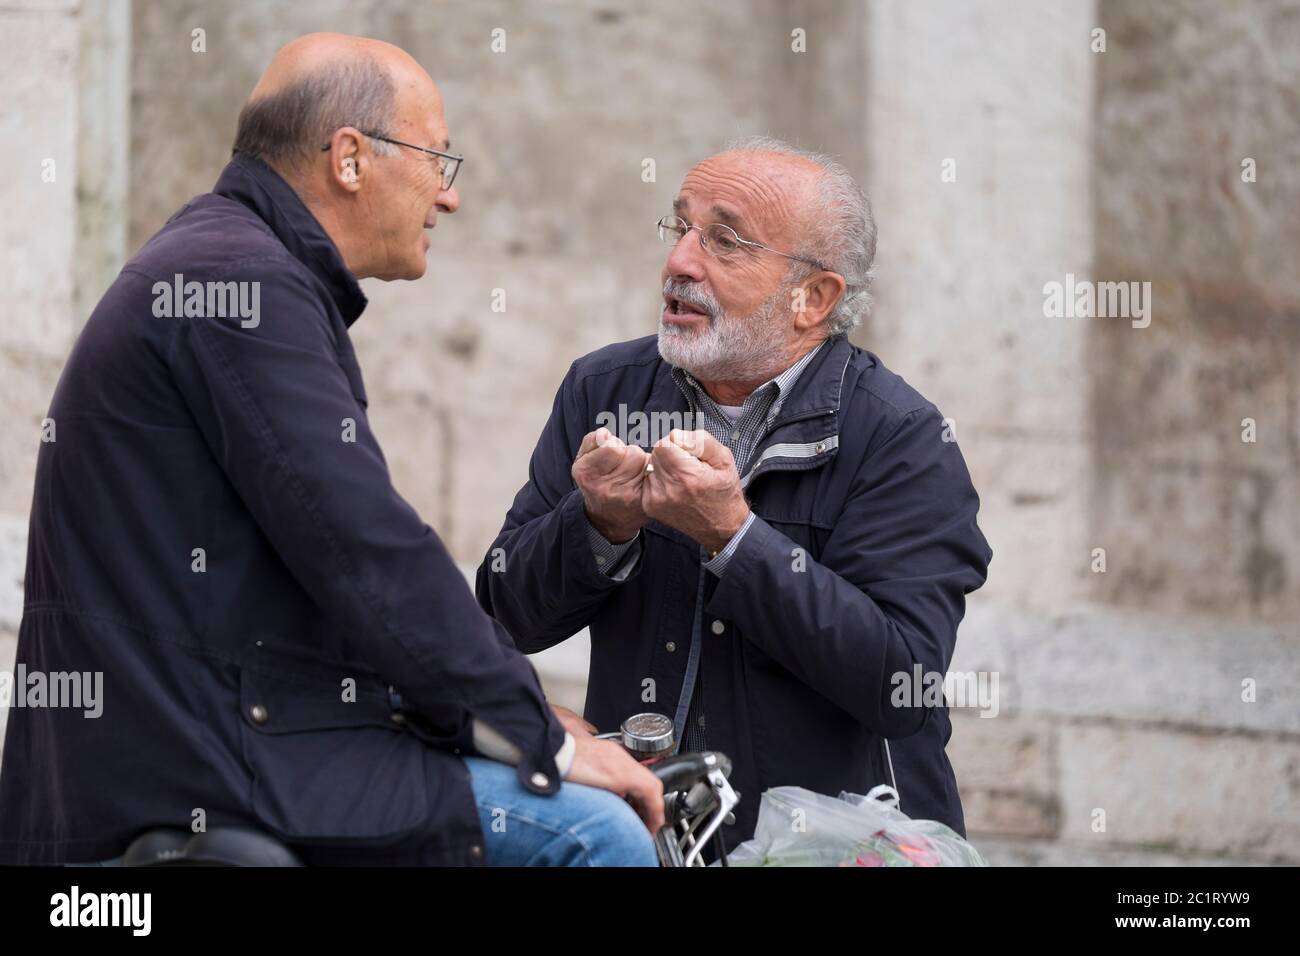 Two Italian men talk to each other and make typical Italian gestures on the square Piazza del Popolo in Ascoli Piceno, Italy Stock Photo